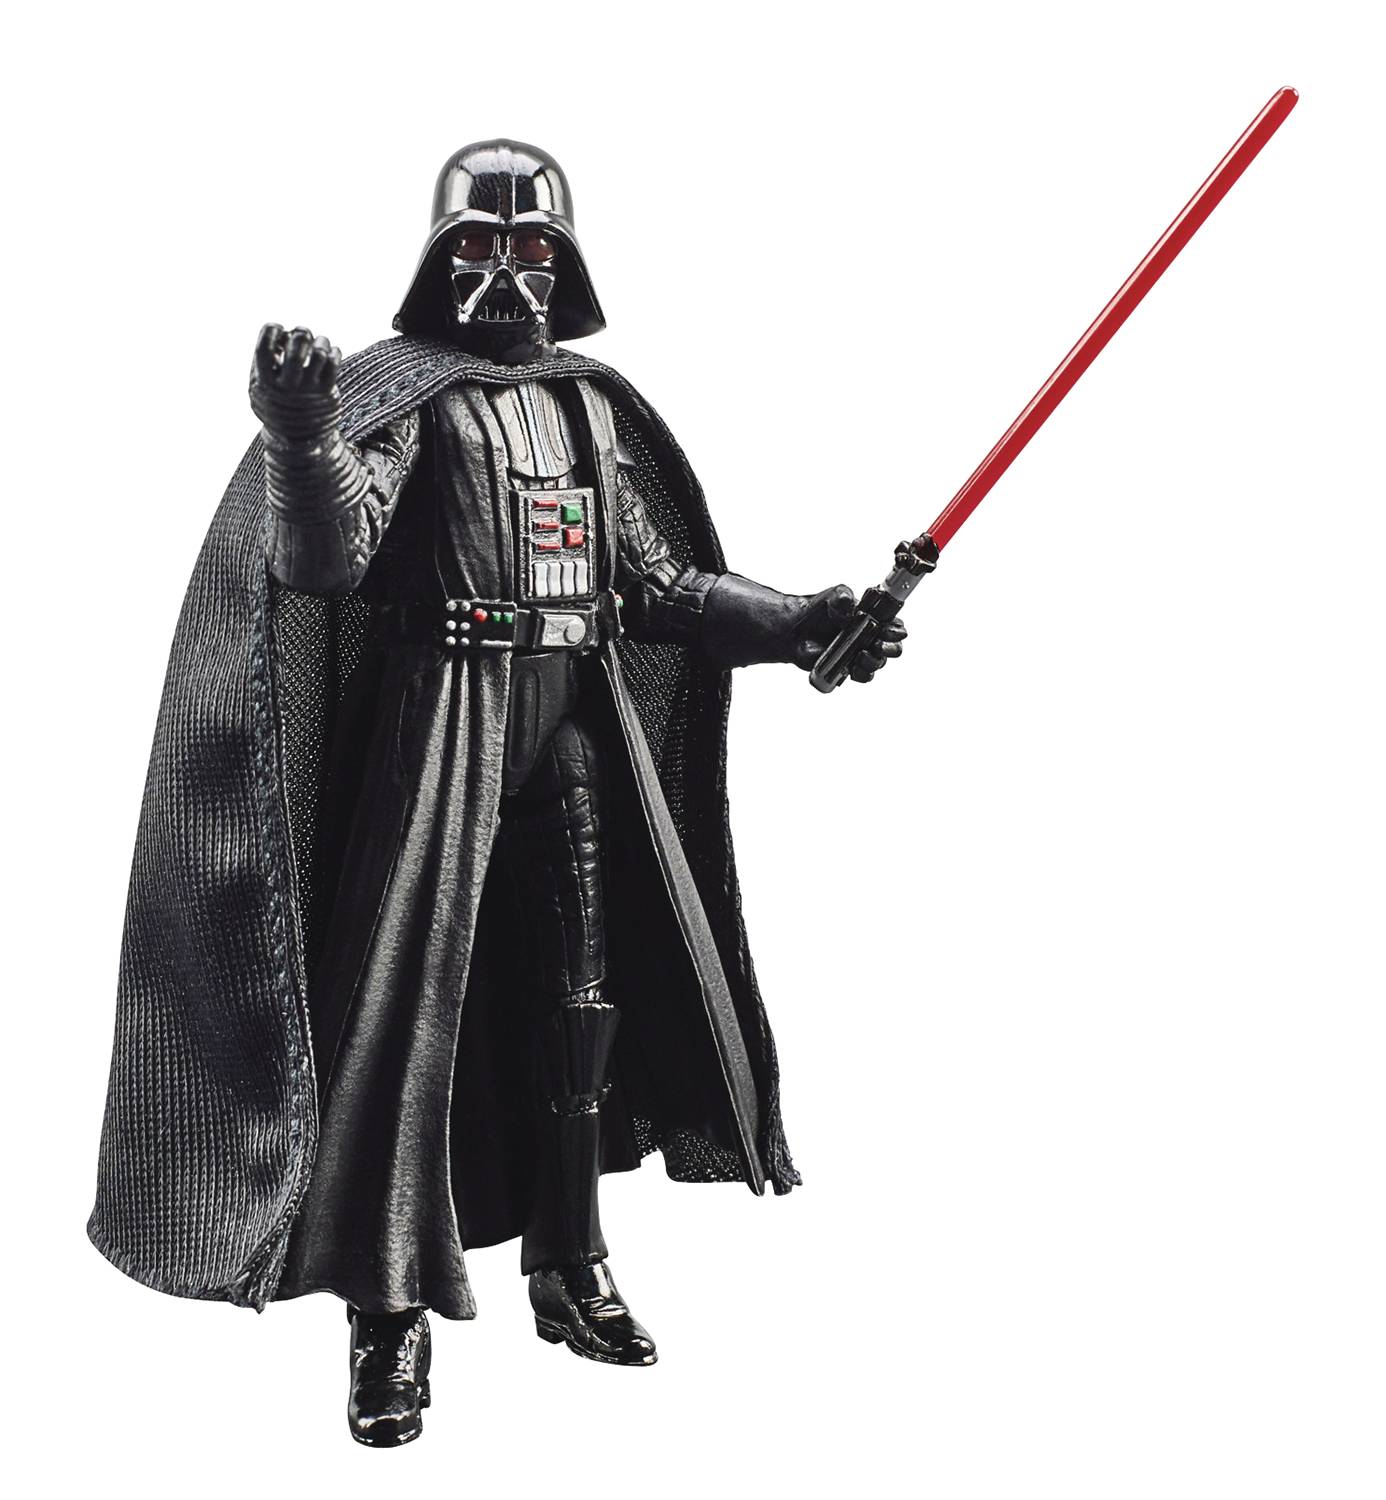 Star Wars Vintage Collection Rogue One Darth Vader 3.75" Action Figure